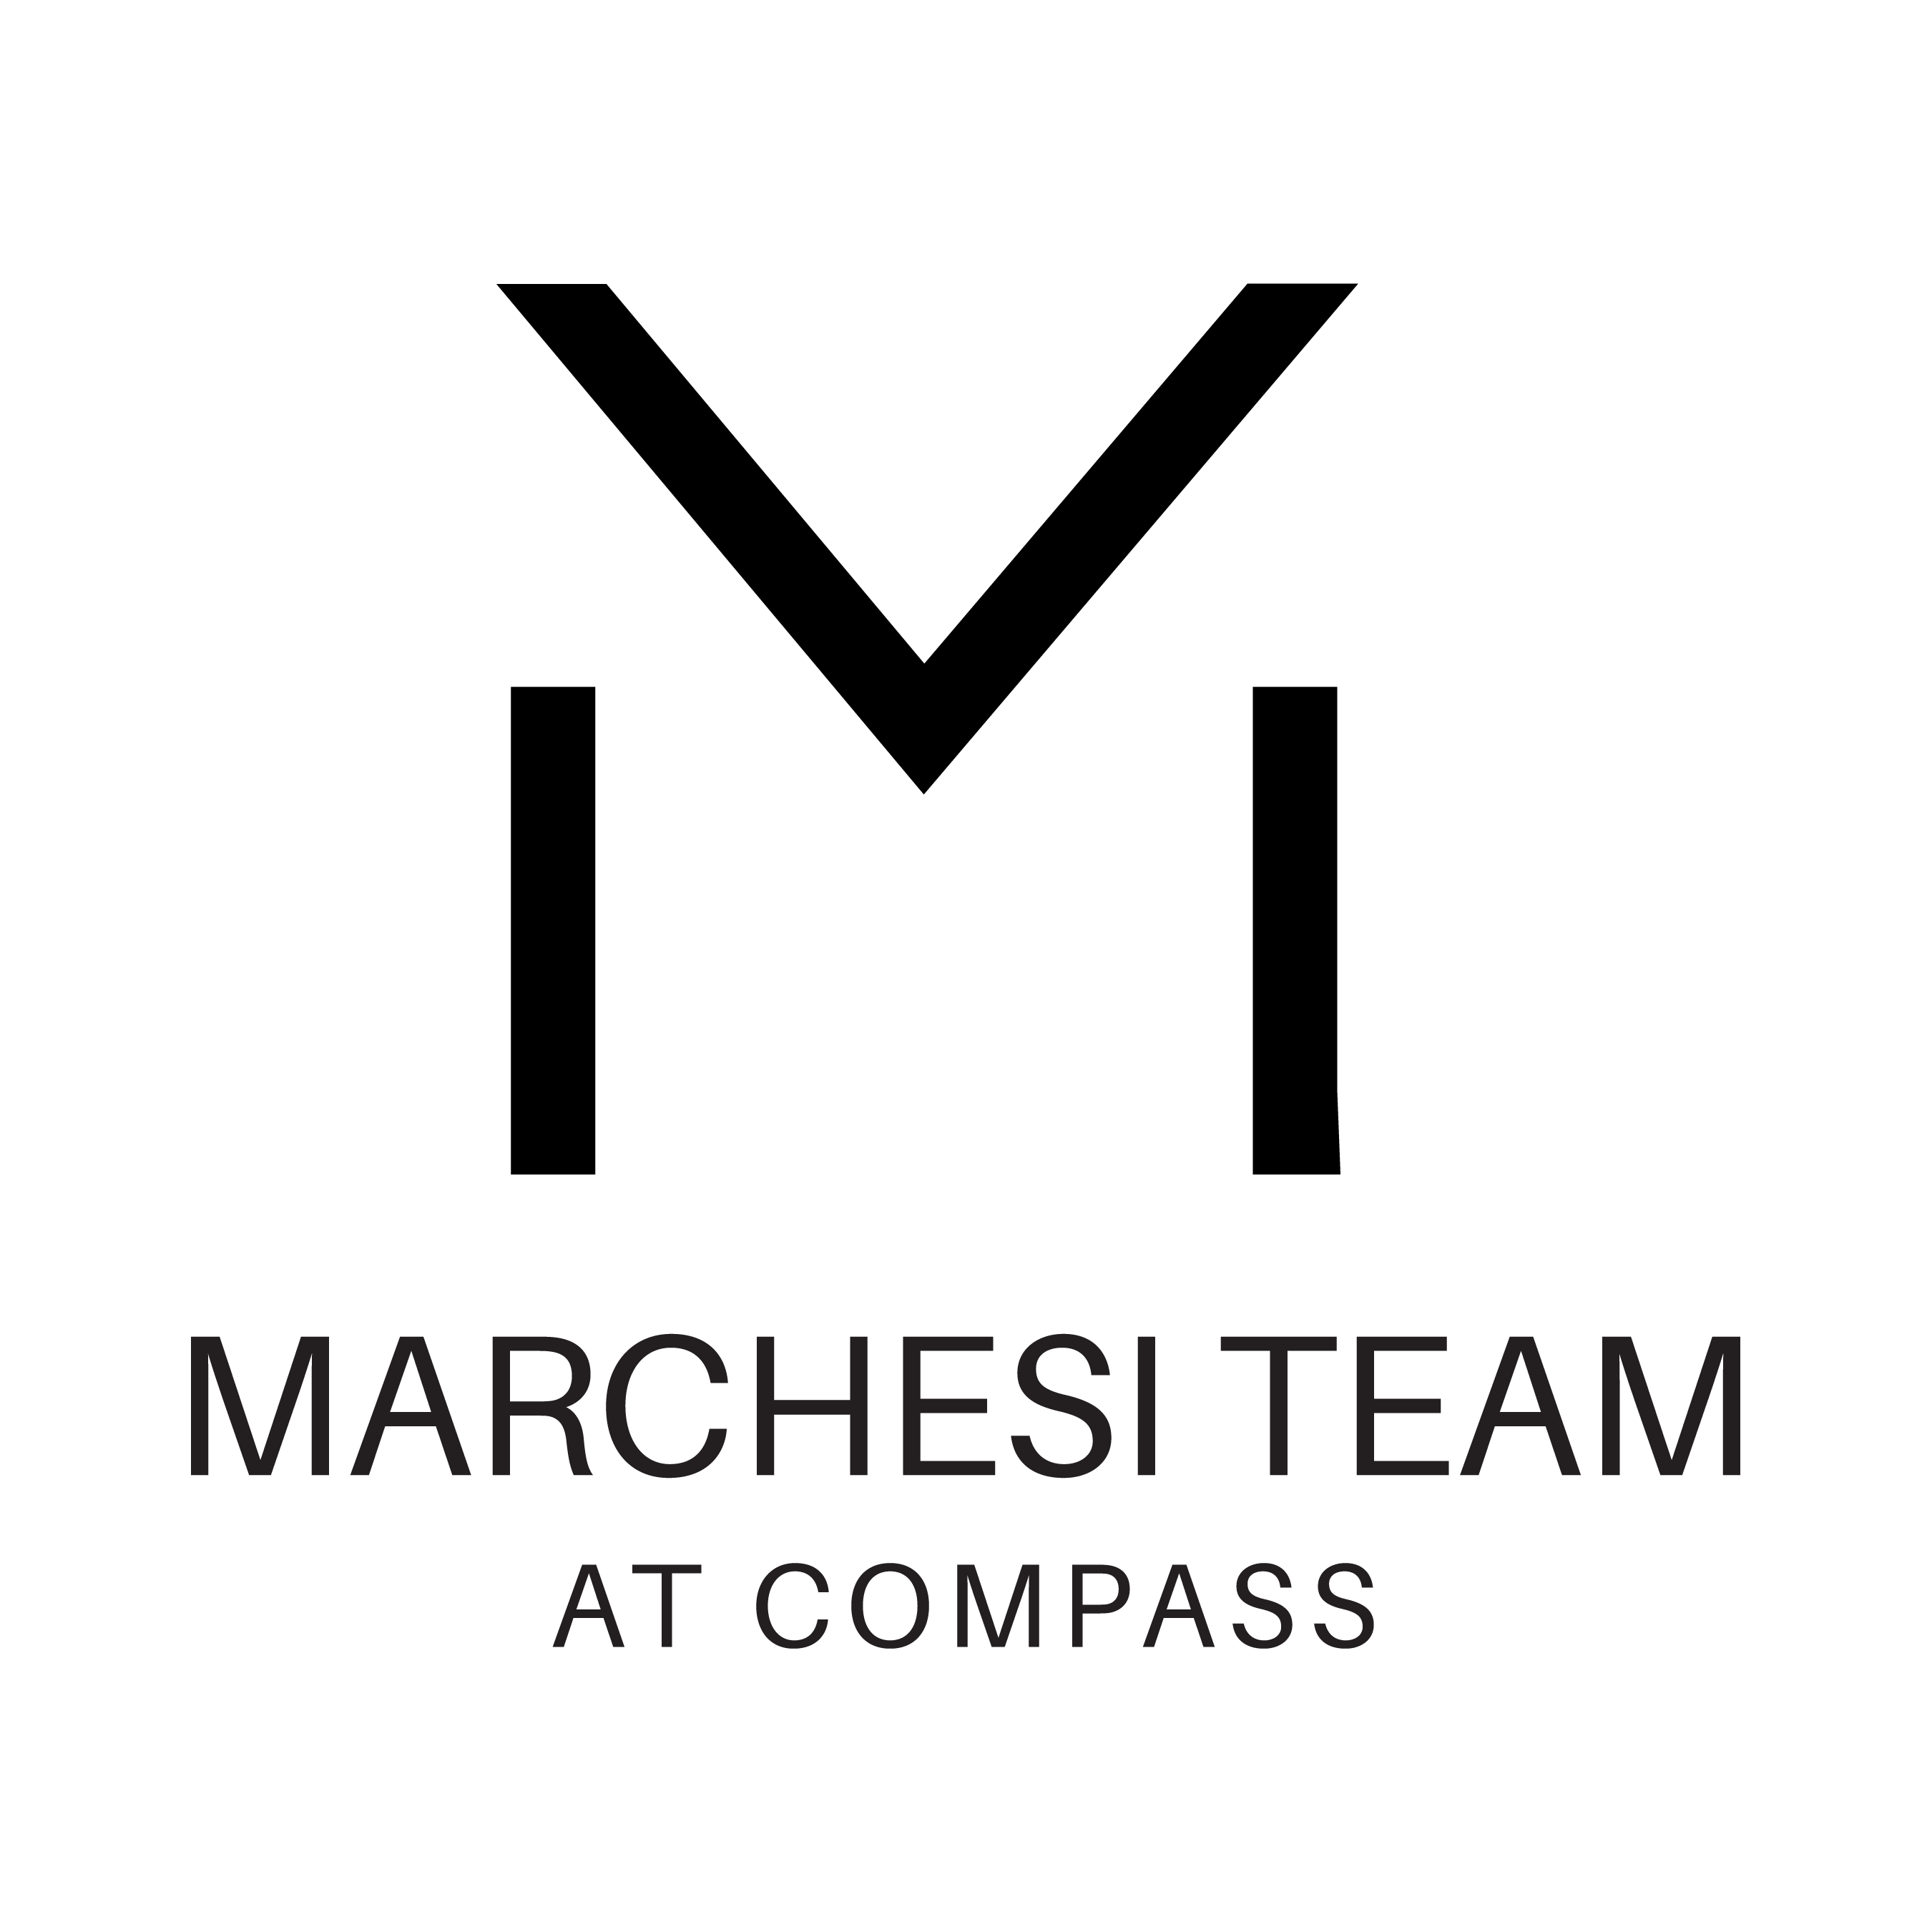 The logo of Marchesi Team.